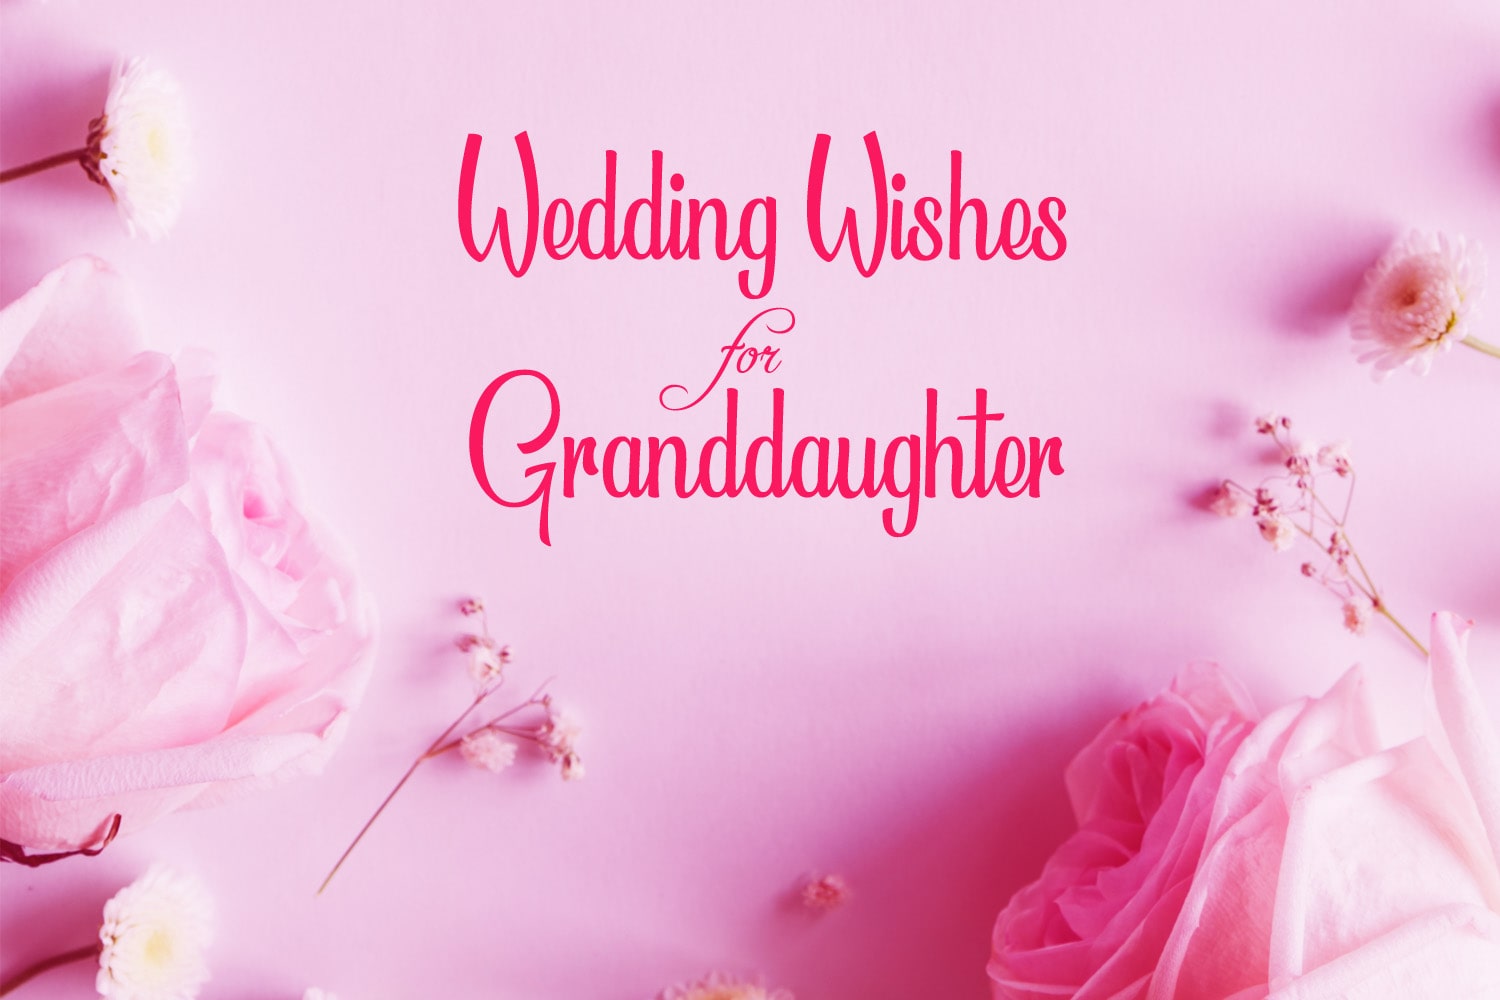 Wedding Wishes for Granddaughter